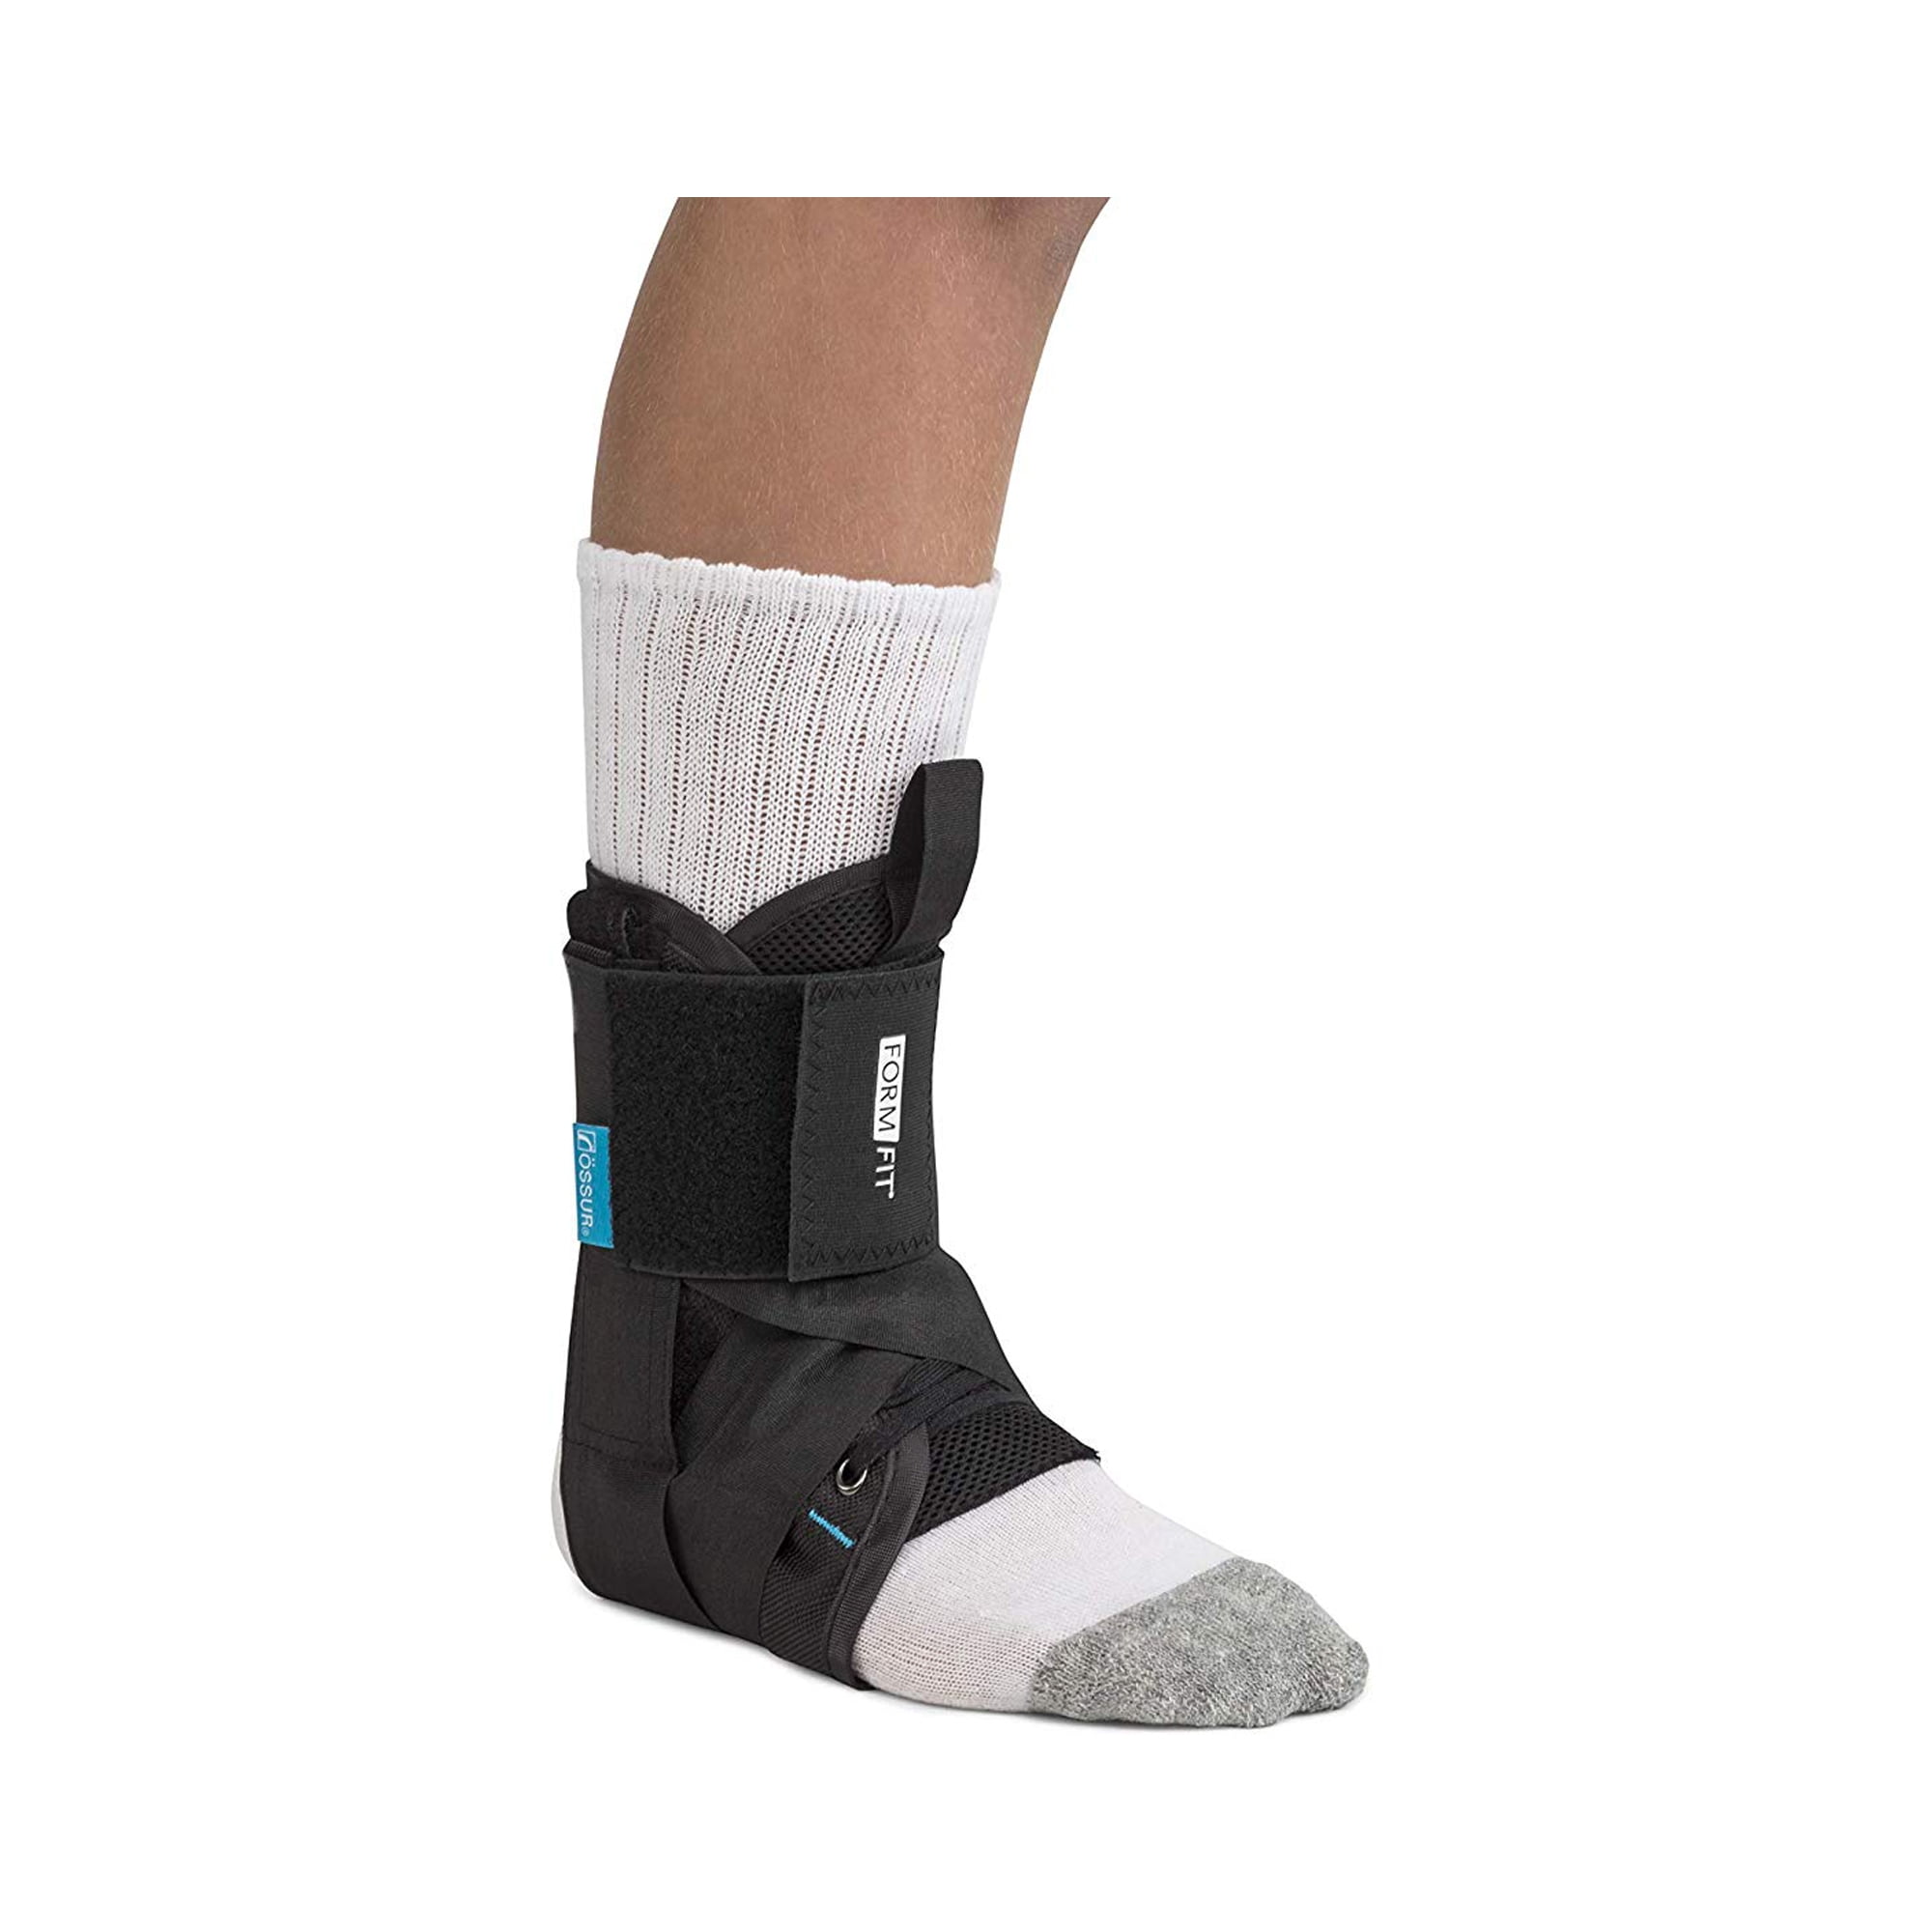 Ossur FormFit Black Ankle Brace with Speed Lace Small 11-12 Ankle Circumf.  Lace Up for the Foot W-10623